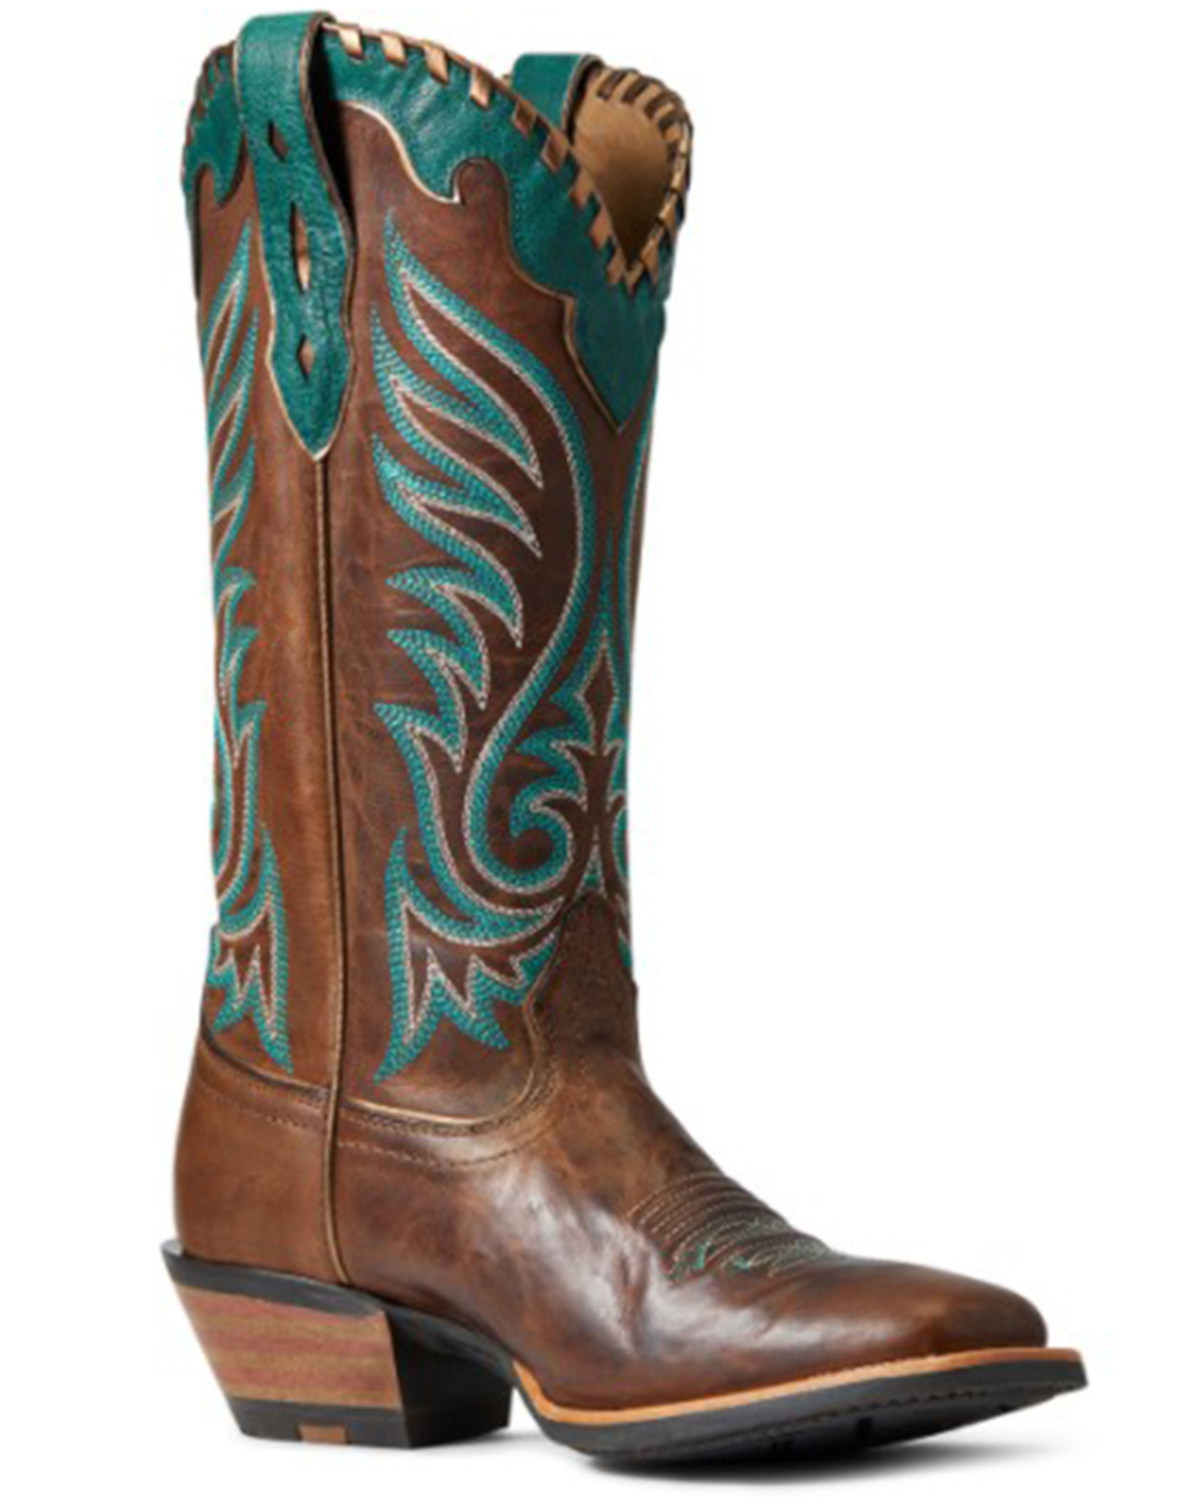 Ariat Women's Weathered Crossfire Picante Performance Western Boots - Broad Square Toe